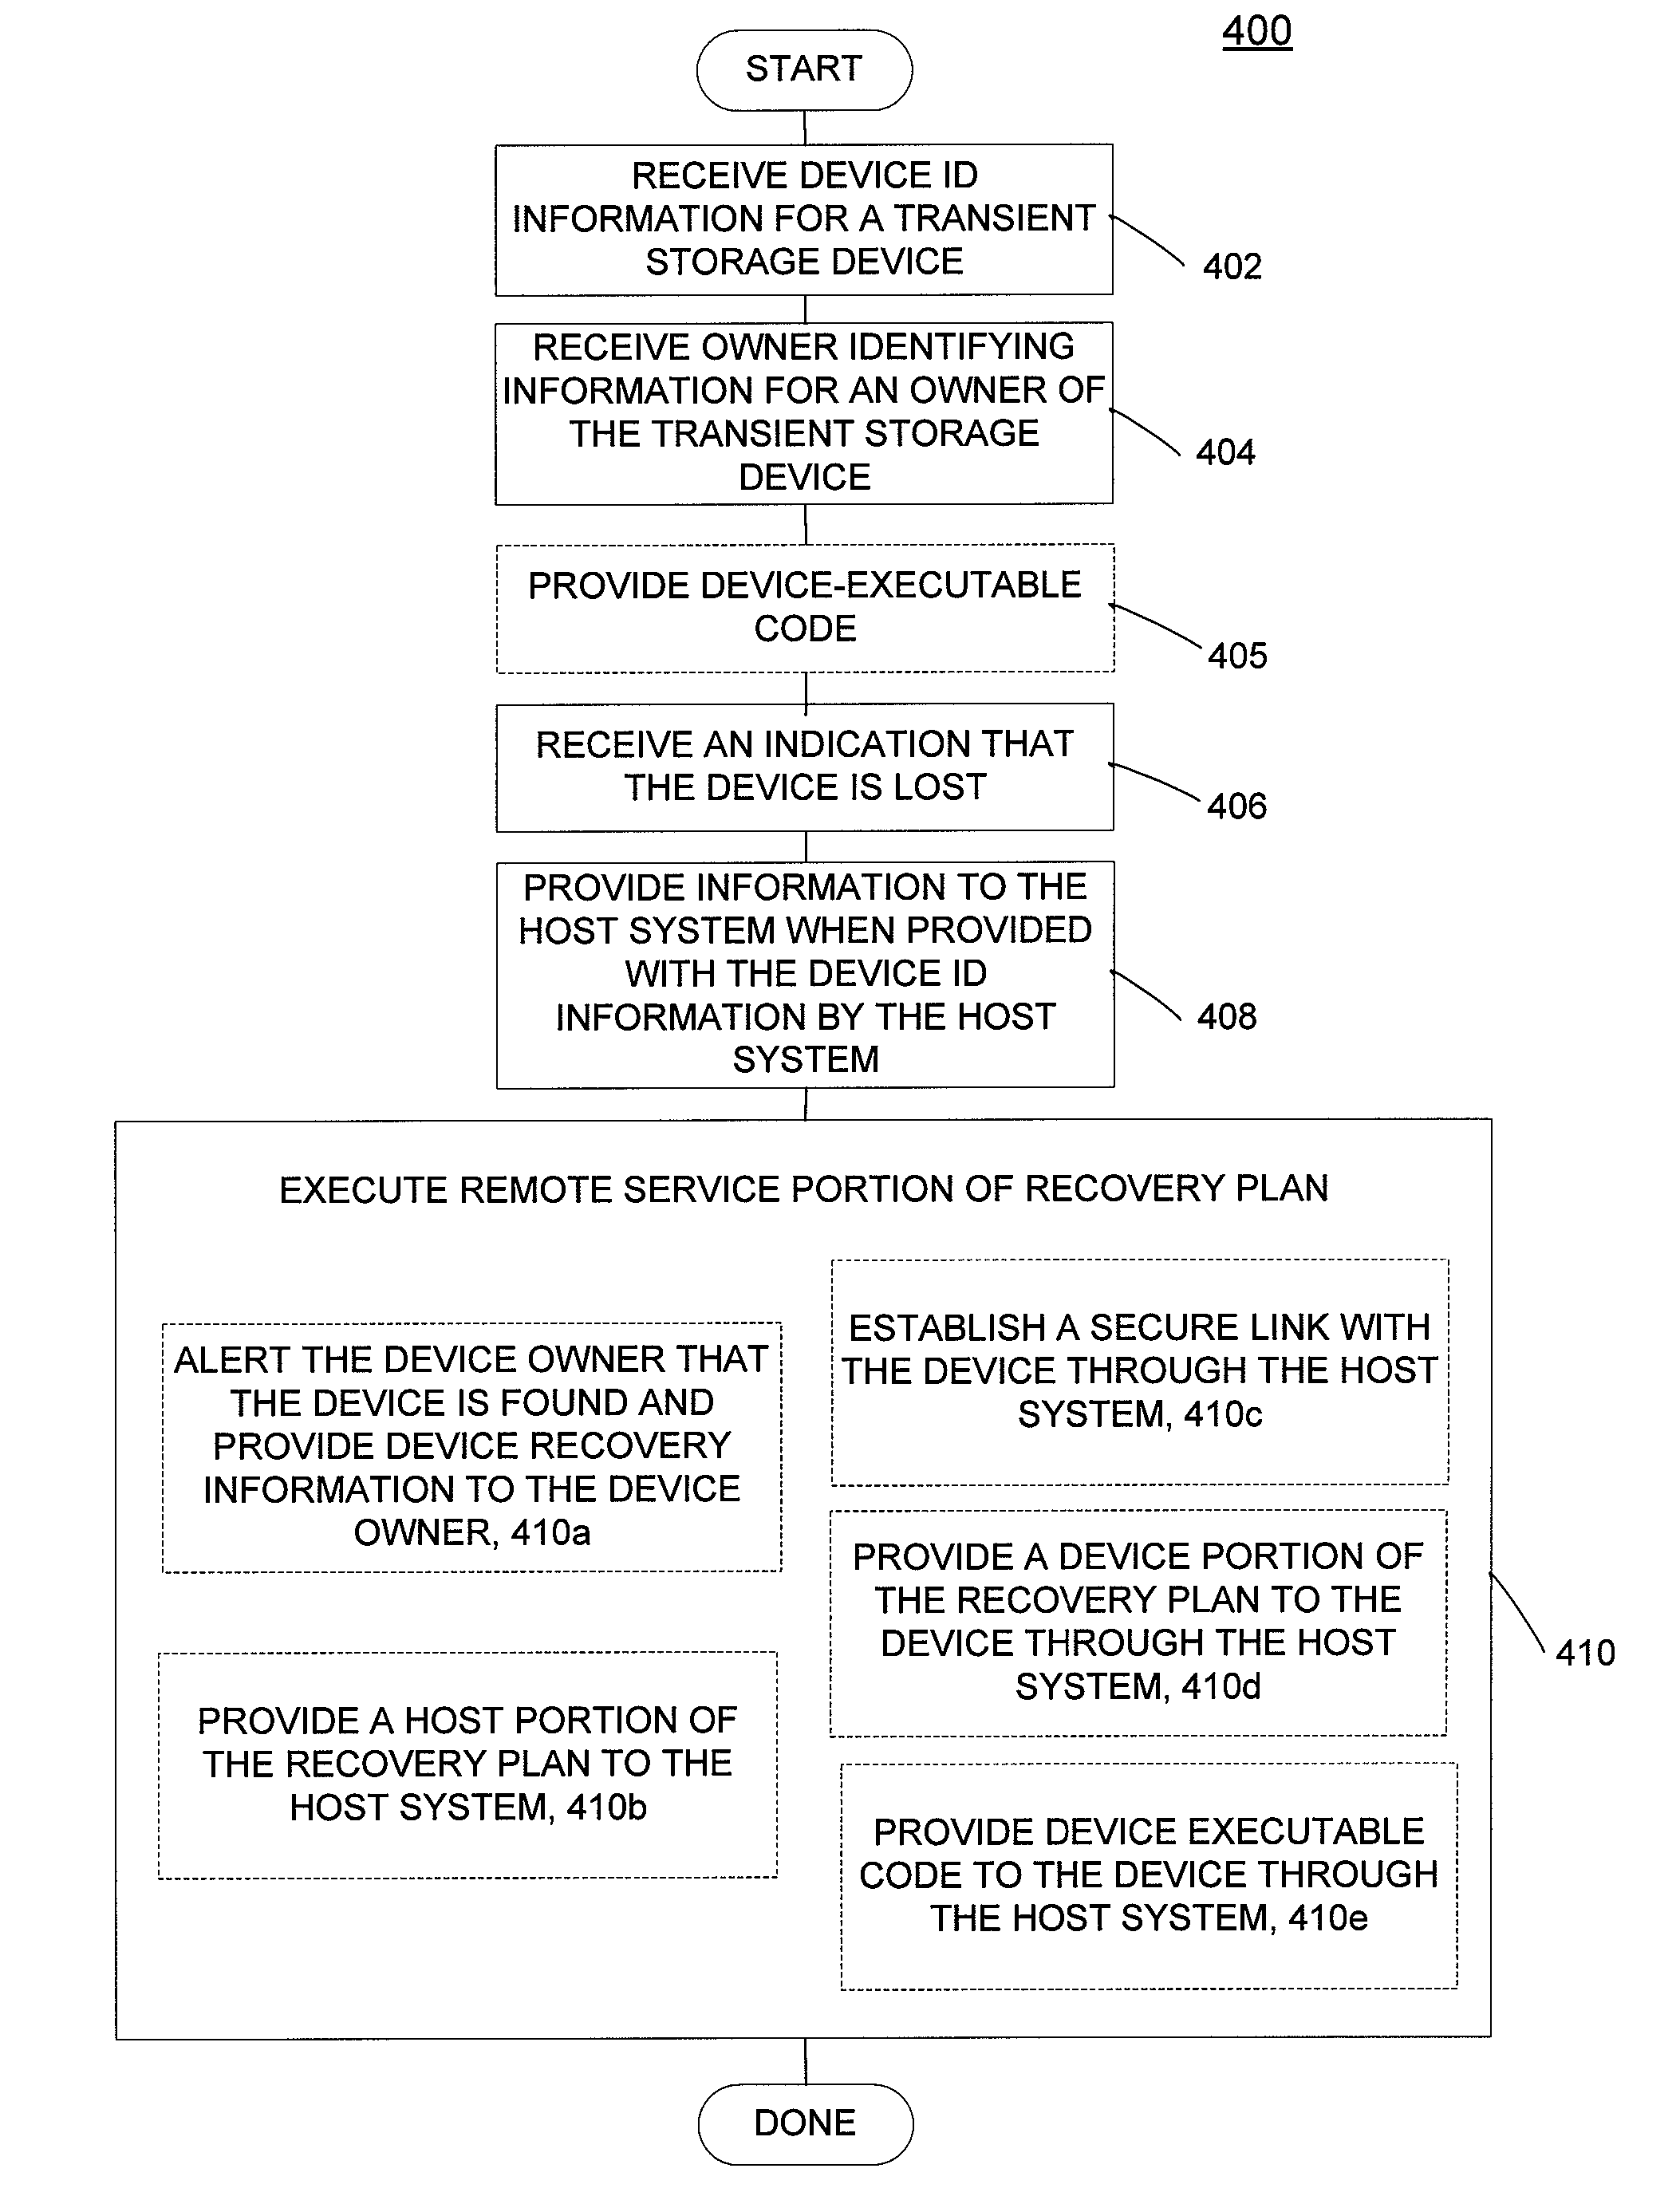 Systems for finding a lost transient storage device